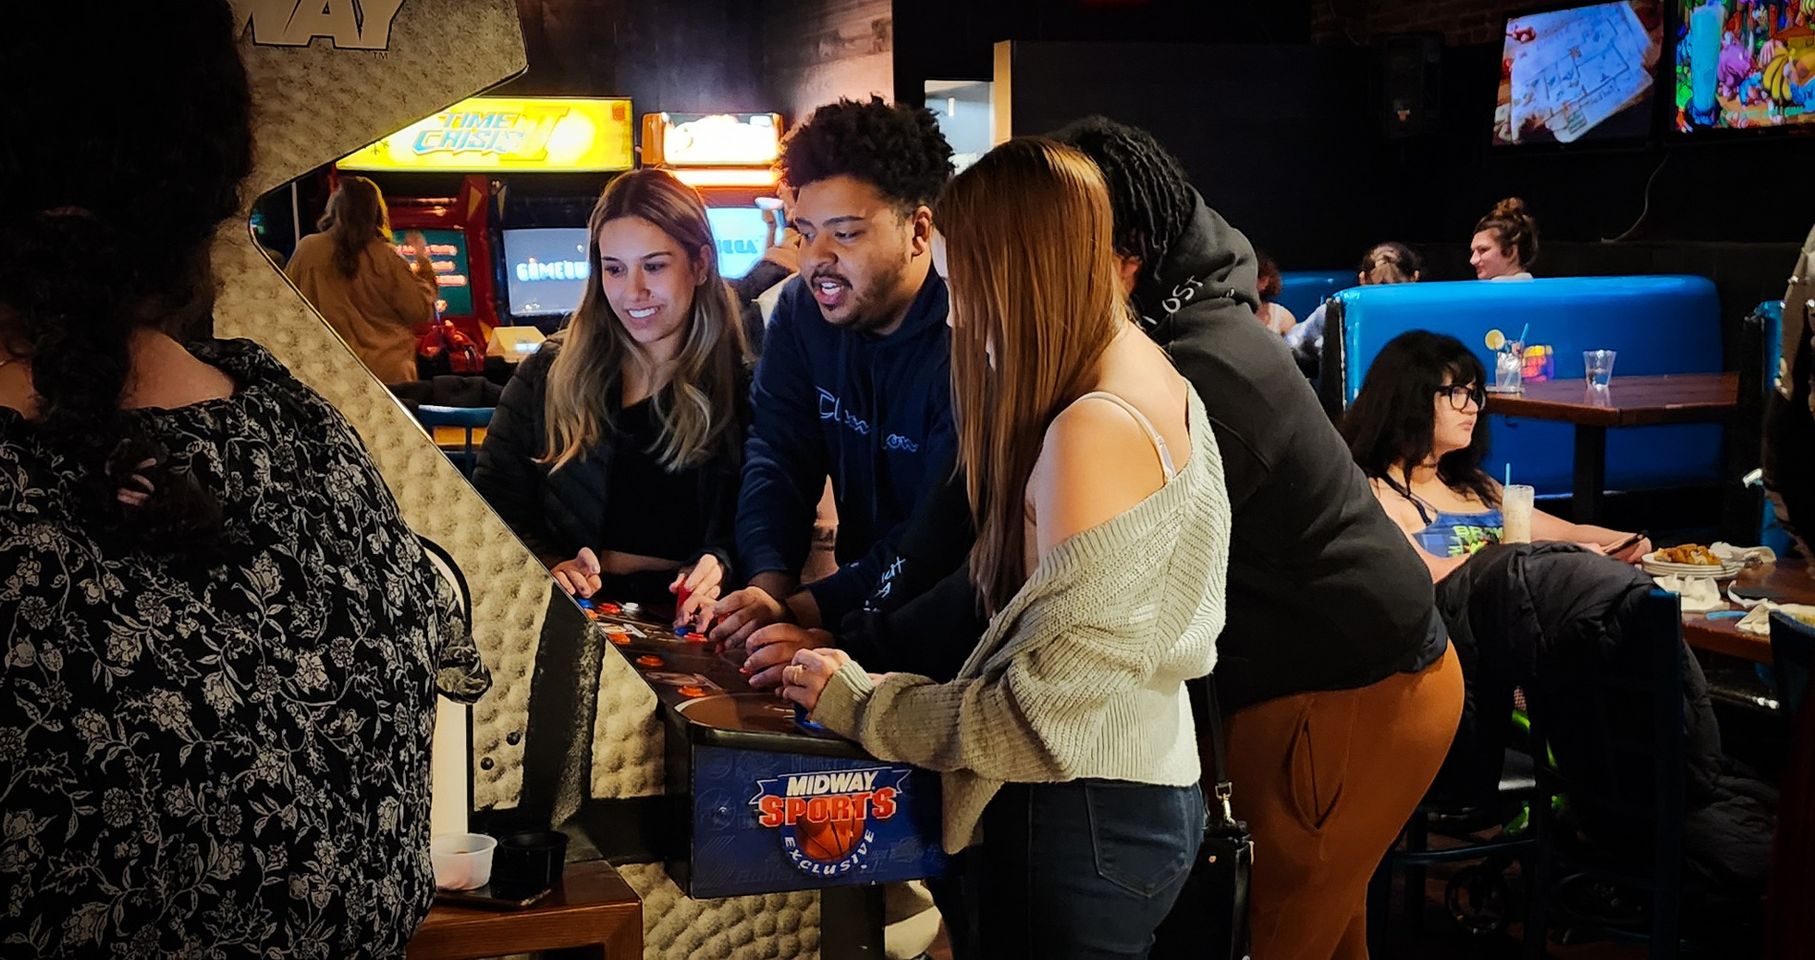 Friends gathering to explore menu options at an exciting arcade, with visuals of fun arcade games in the backdrop.